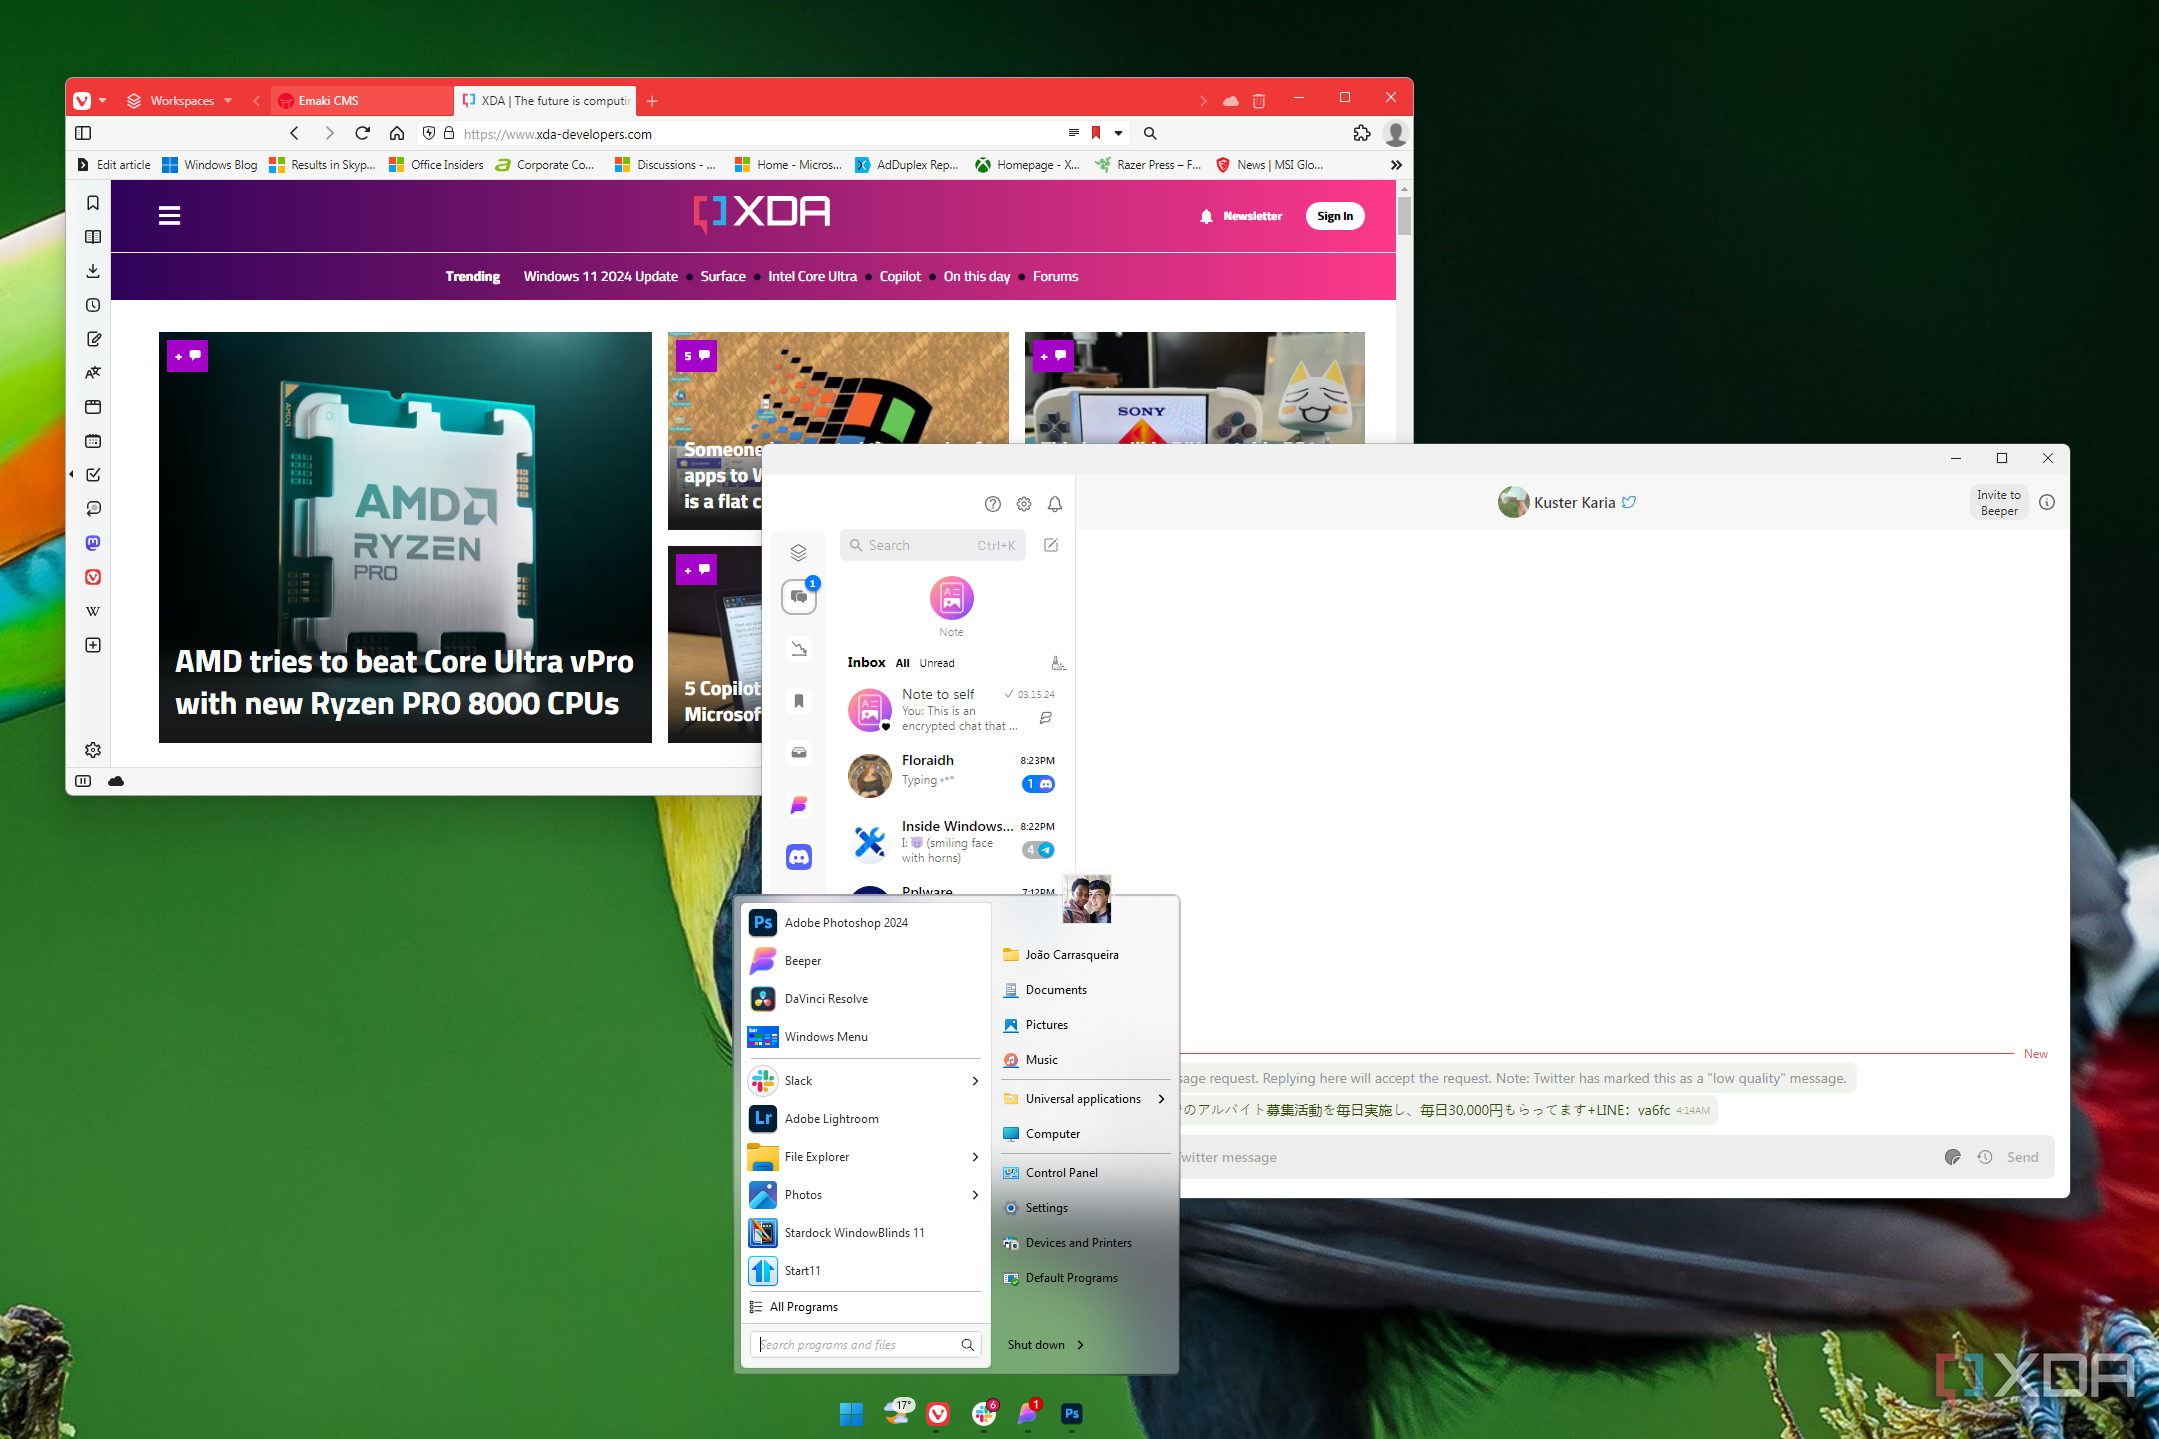 10 essential apps you should install on your new PC